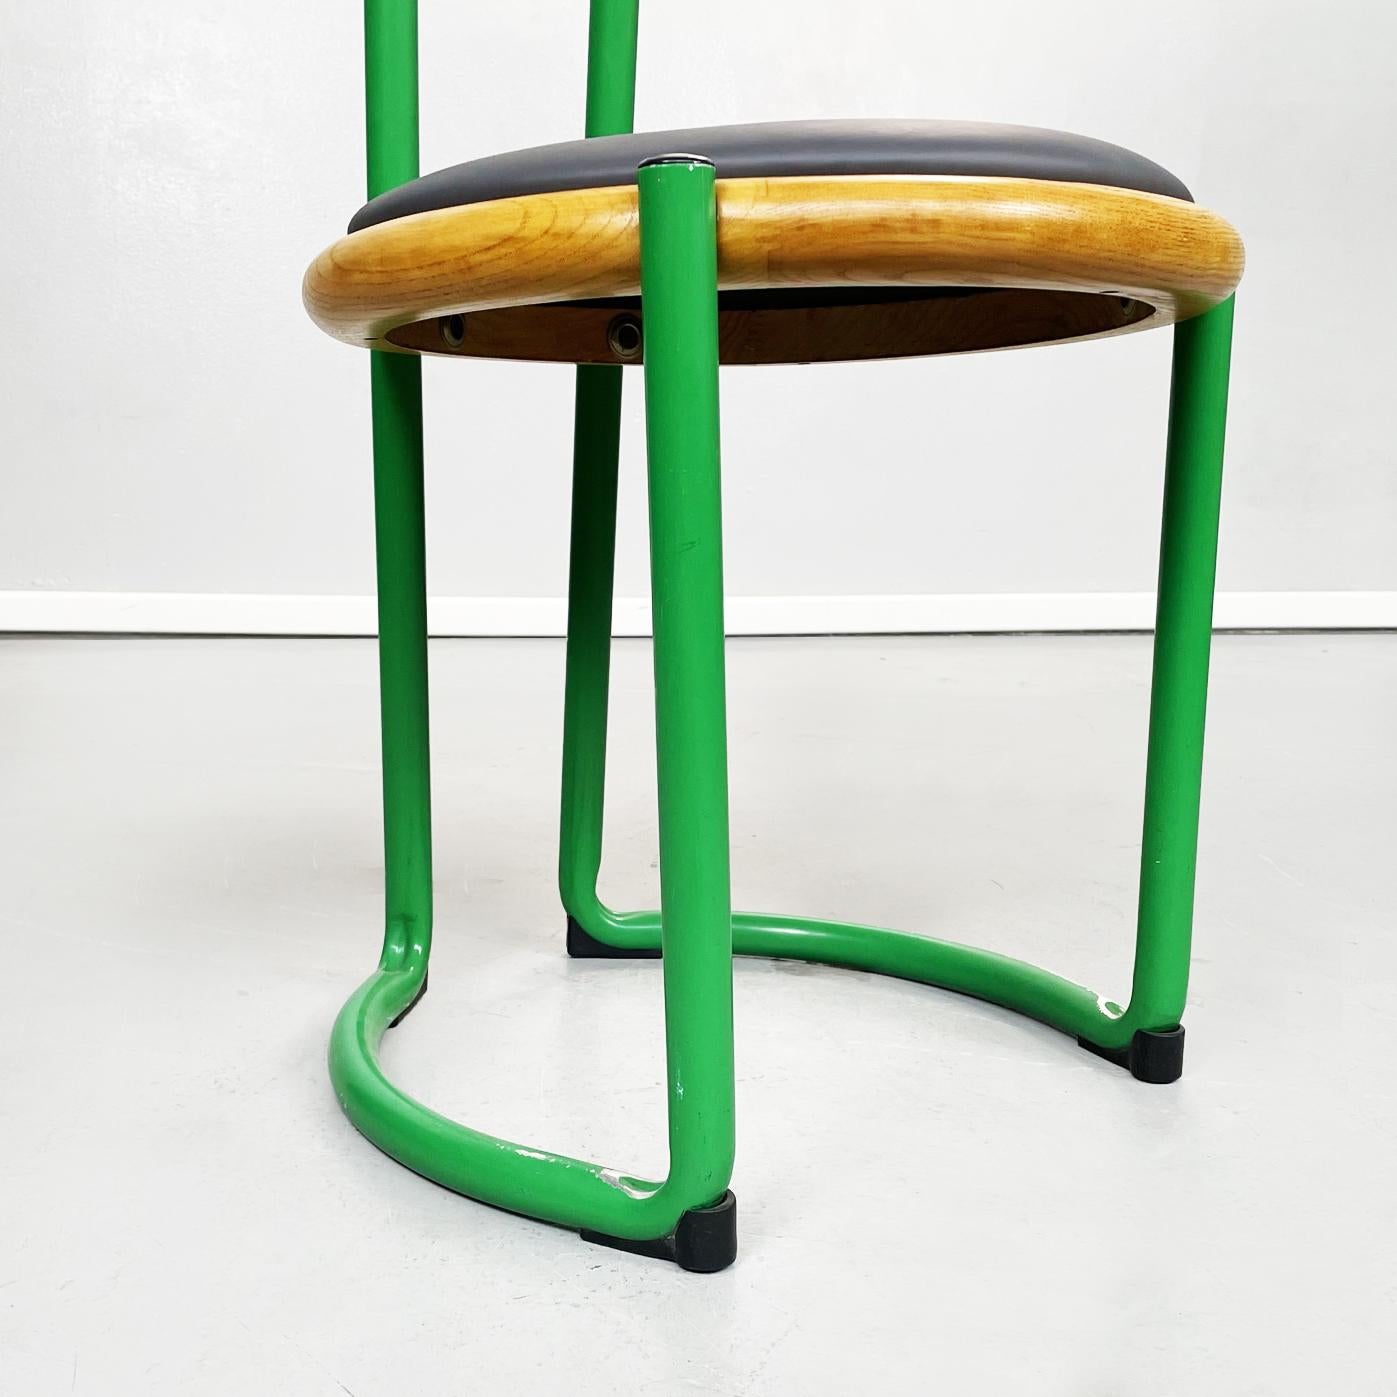 Italian Mid-Century Round Green Metal, Leather Wood Chairs by Tito Agnoli, 1950s 8